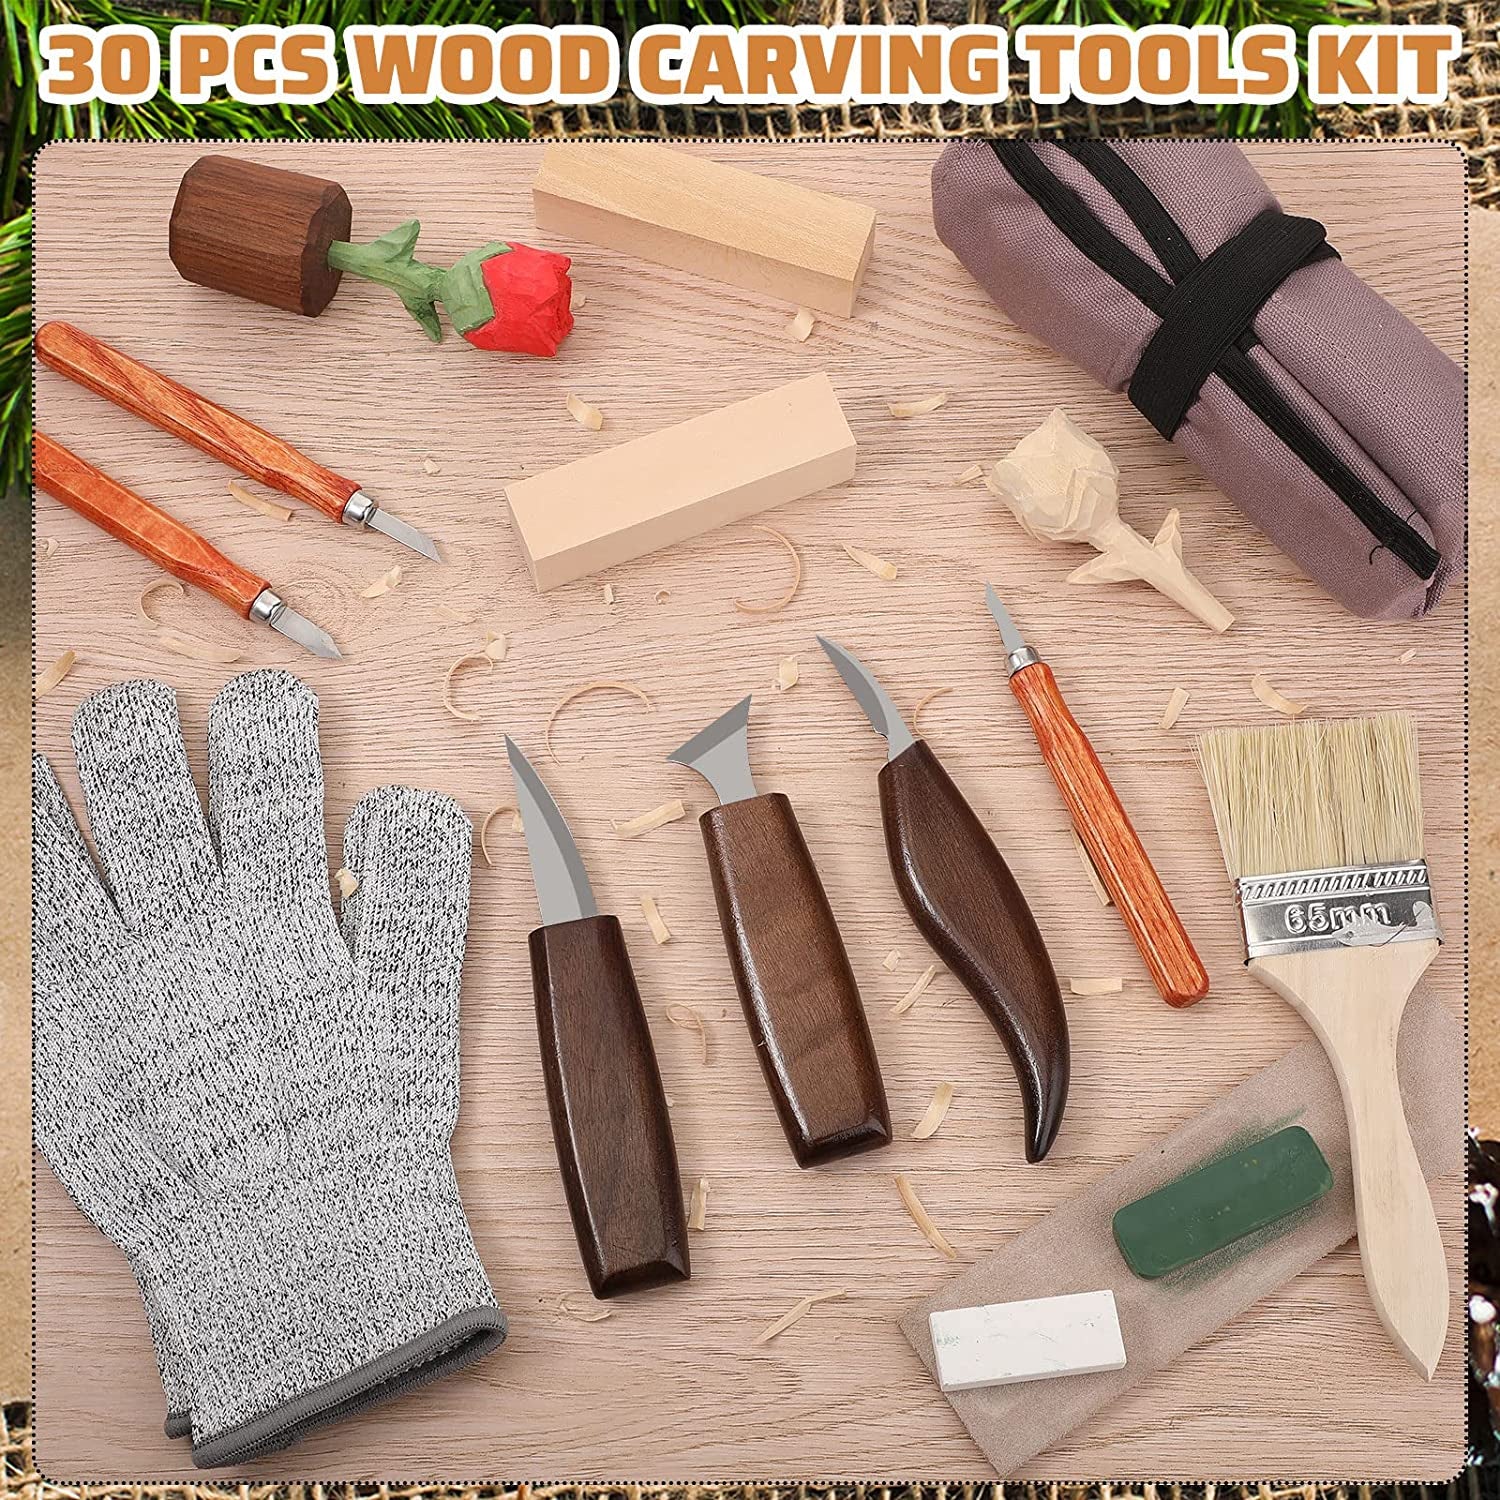 30 Pcs Wood Carving Tools Wood Whittling Kit Include Hand Carving Knife Set Wood Blocks Cut Resistant Gloves Sawdust Brush Sharpening Stone Polishing Wax Sharpening Leather Storage Bag for Beginners